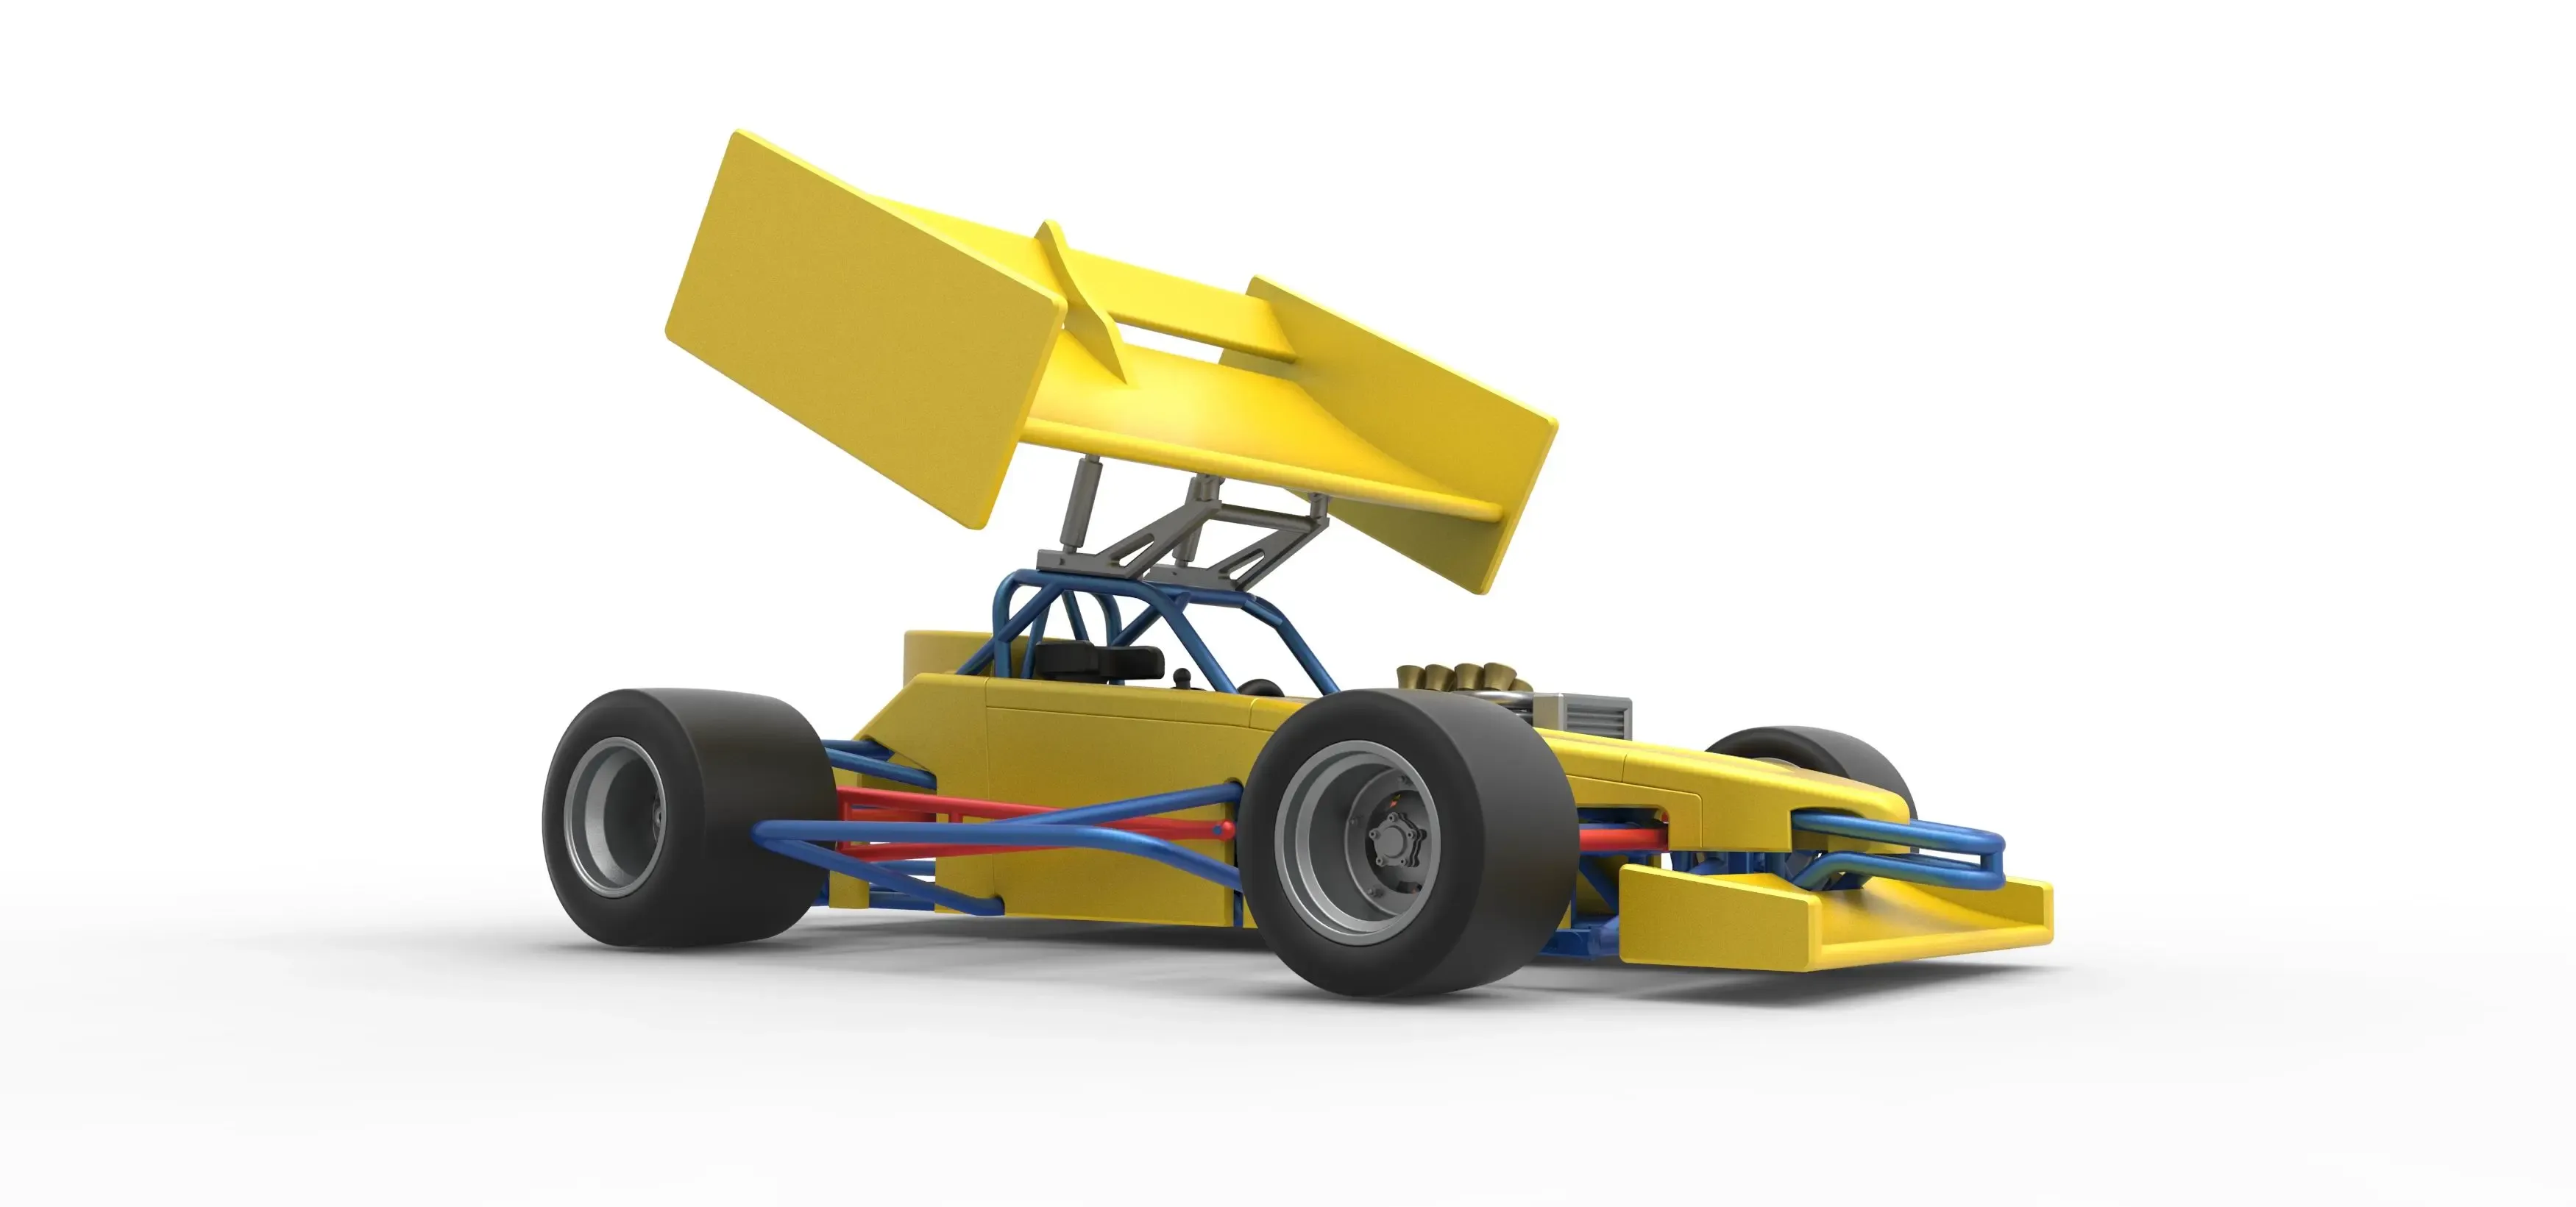 Supermodified front engine Winged race car V2 Scale 1:25